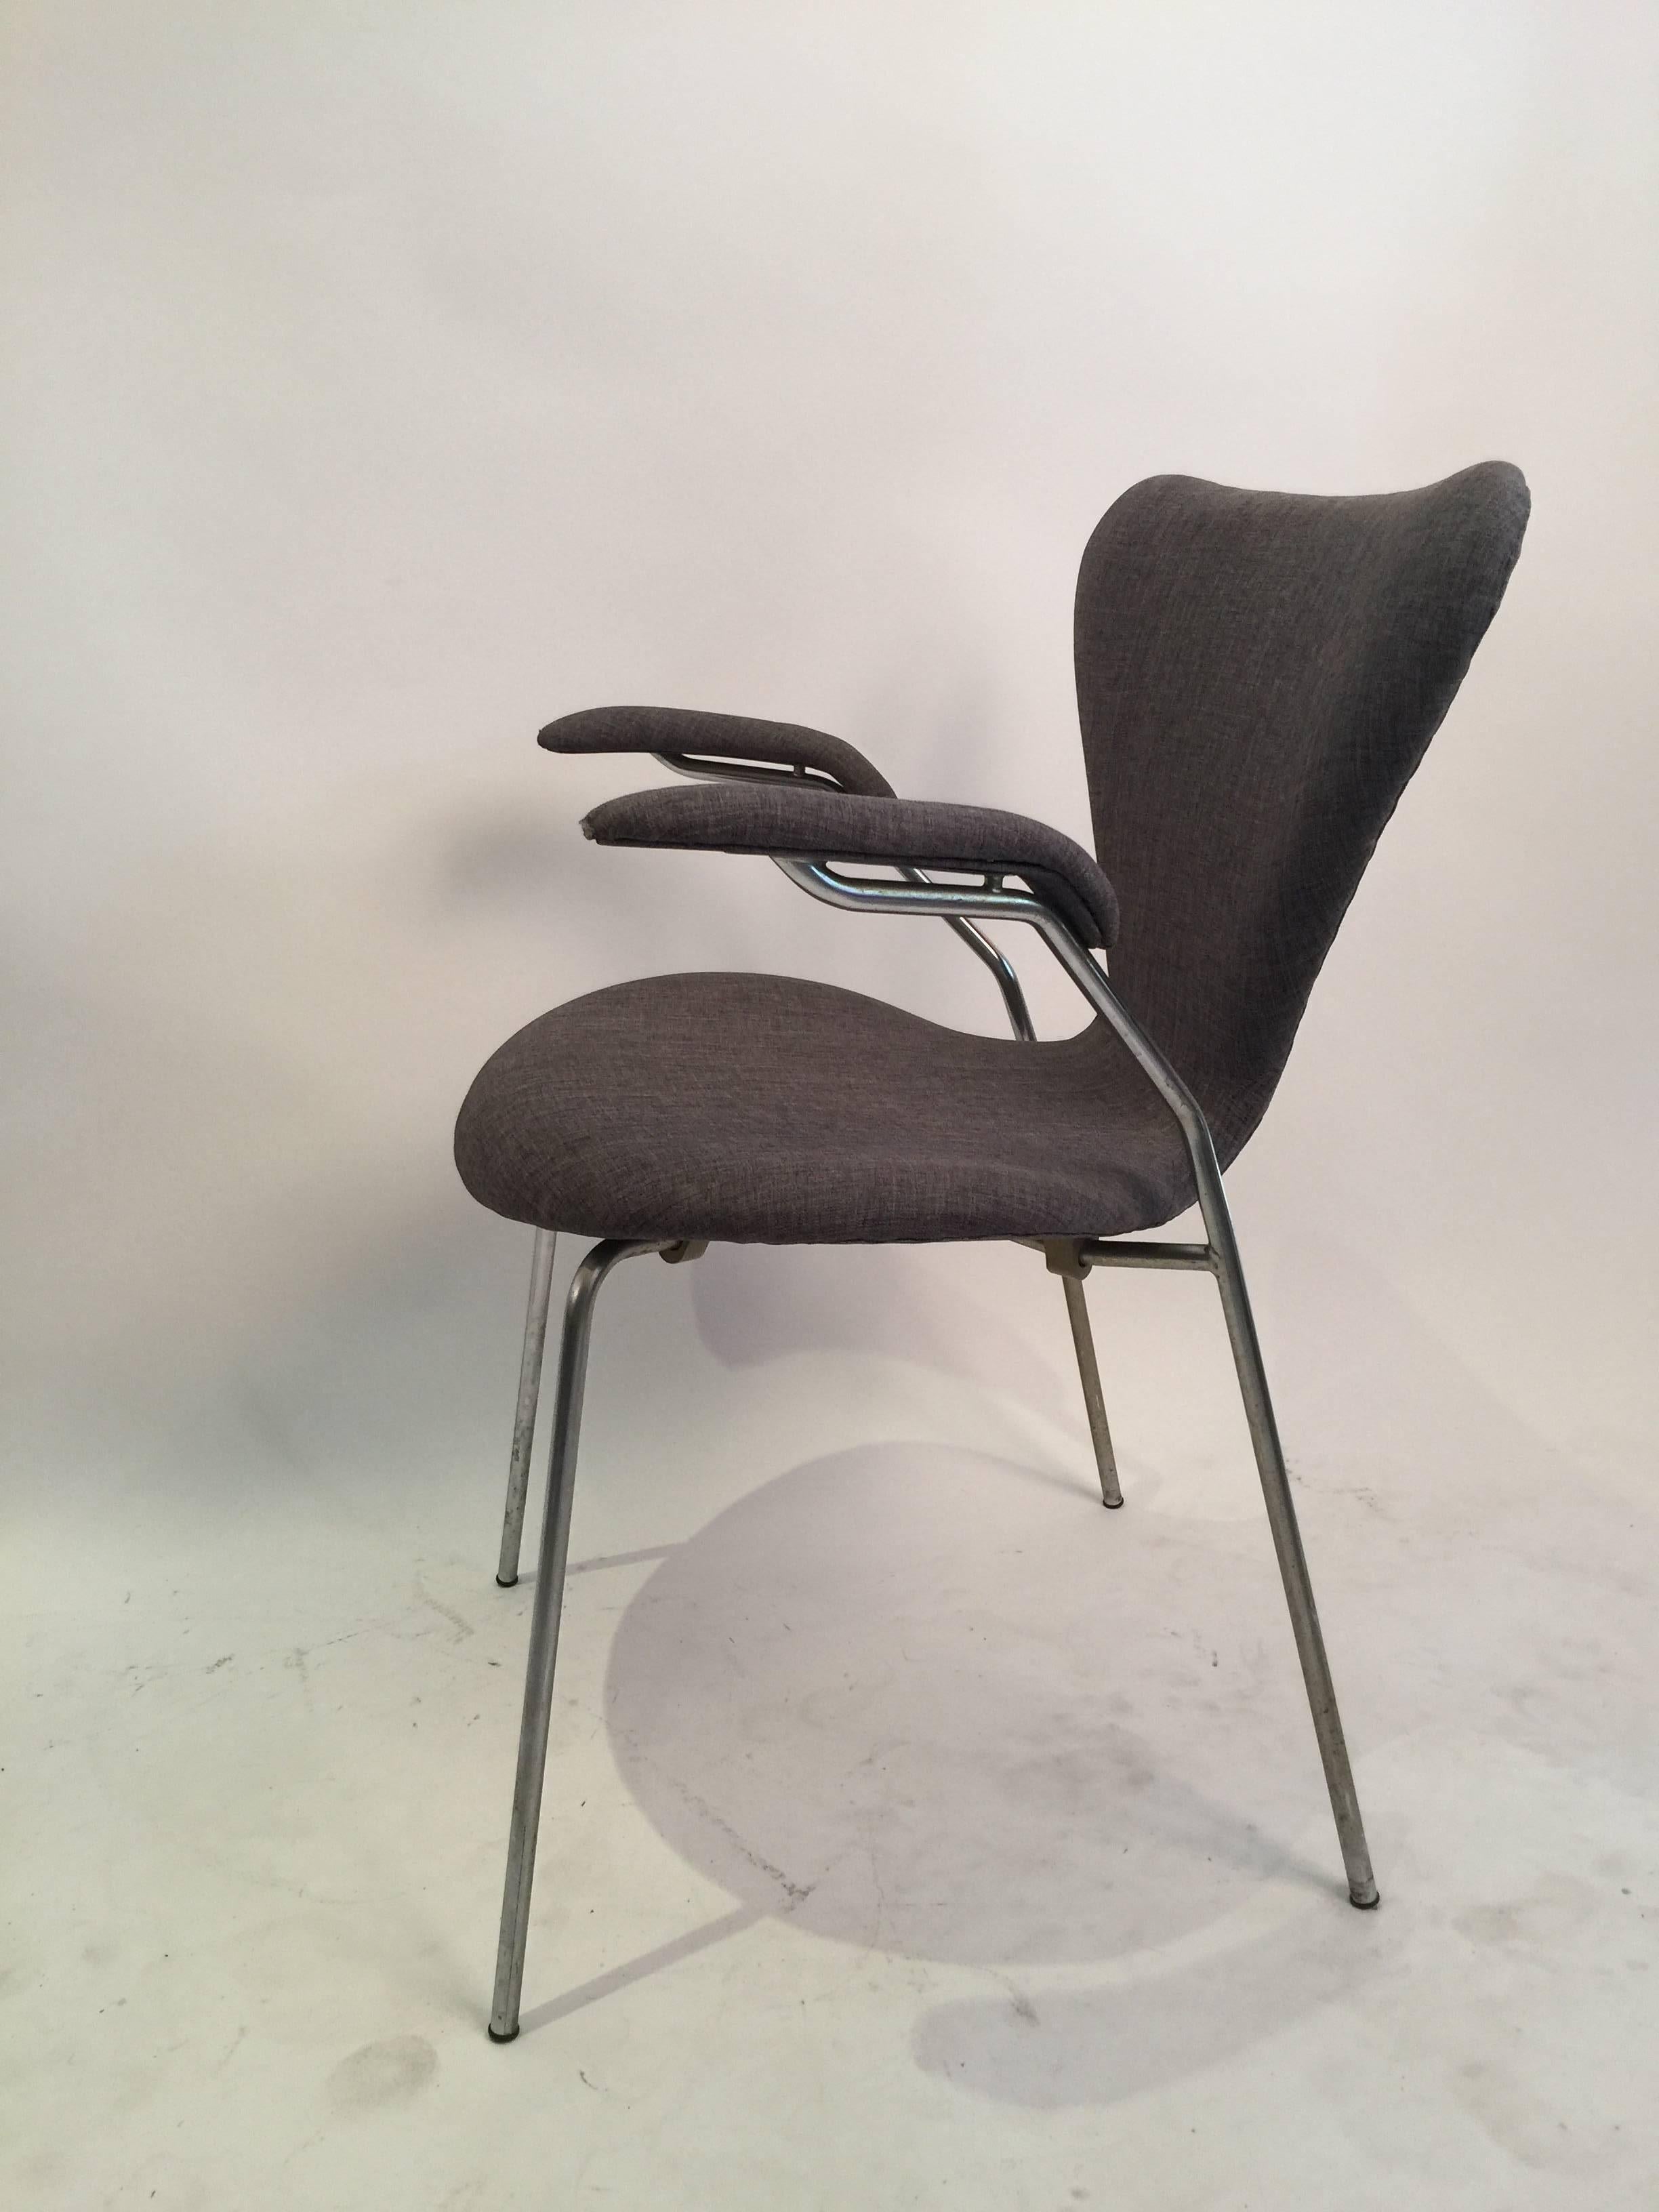 Iconic Fritz Hansen series 7 armchair designed by Arne Jacobsen in the 1970s. Padded arm version, recovered in the late 1980s by original owner in grey fabric. Built from bent plywood with tubular steel frame.
See other listing for the pair.